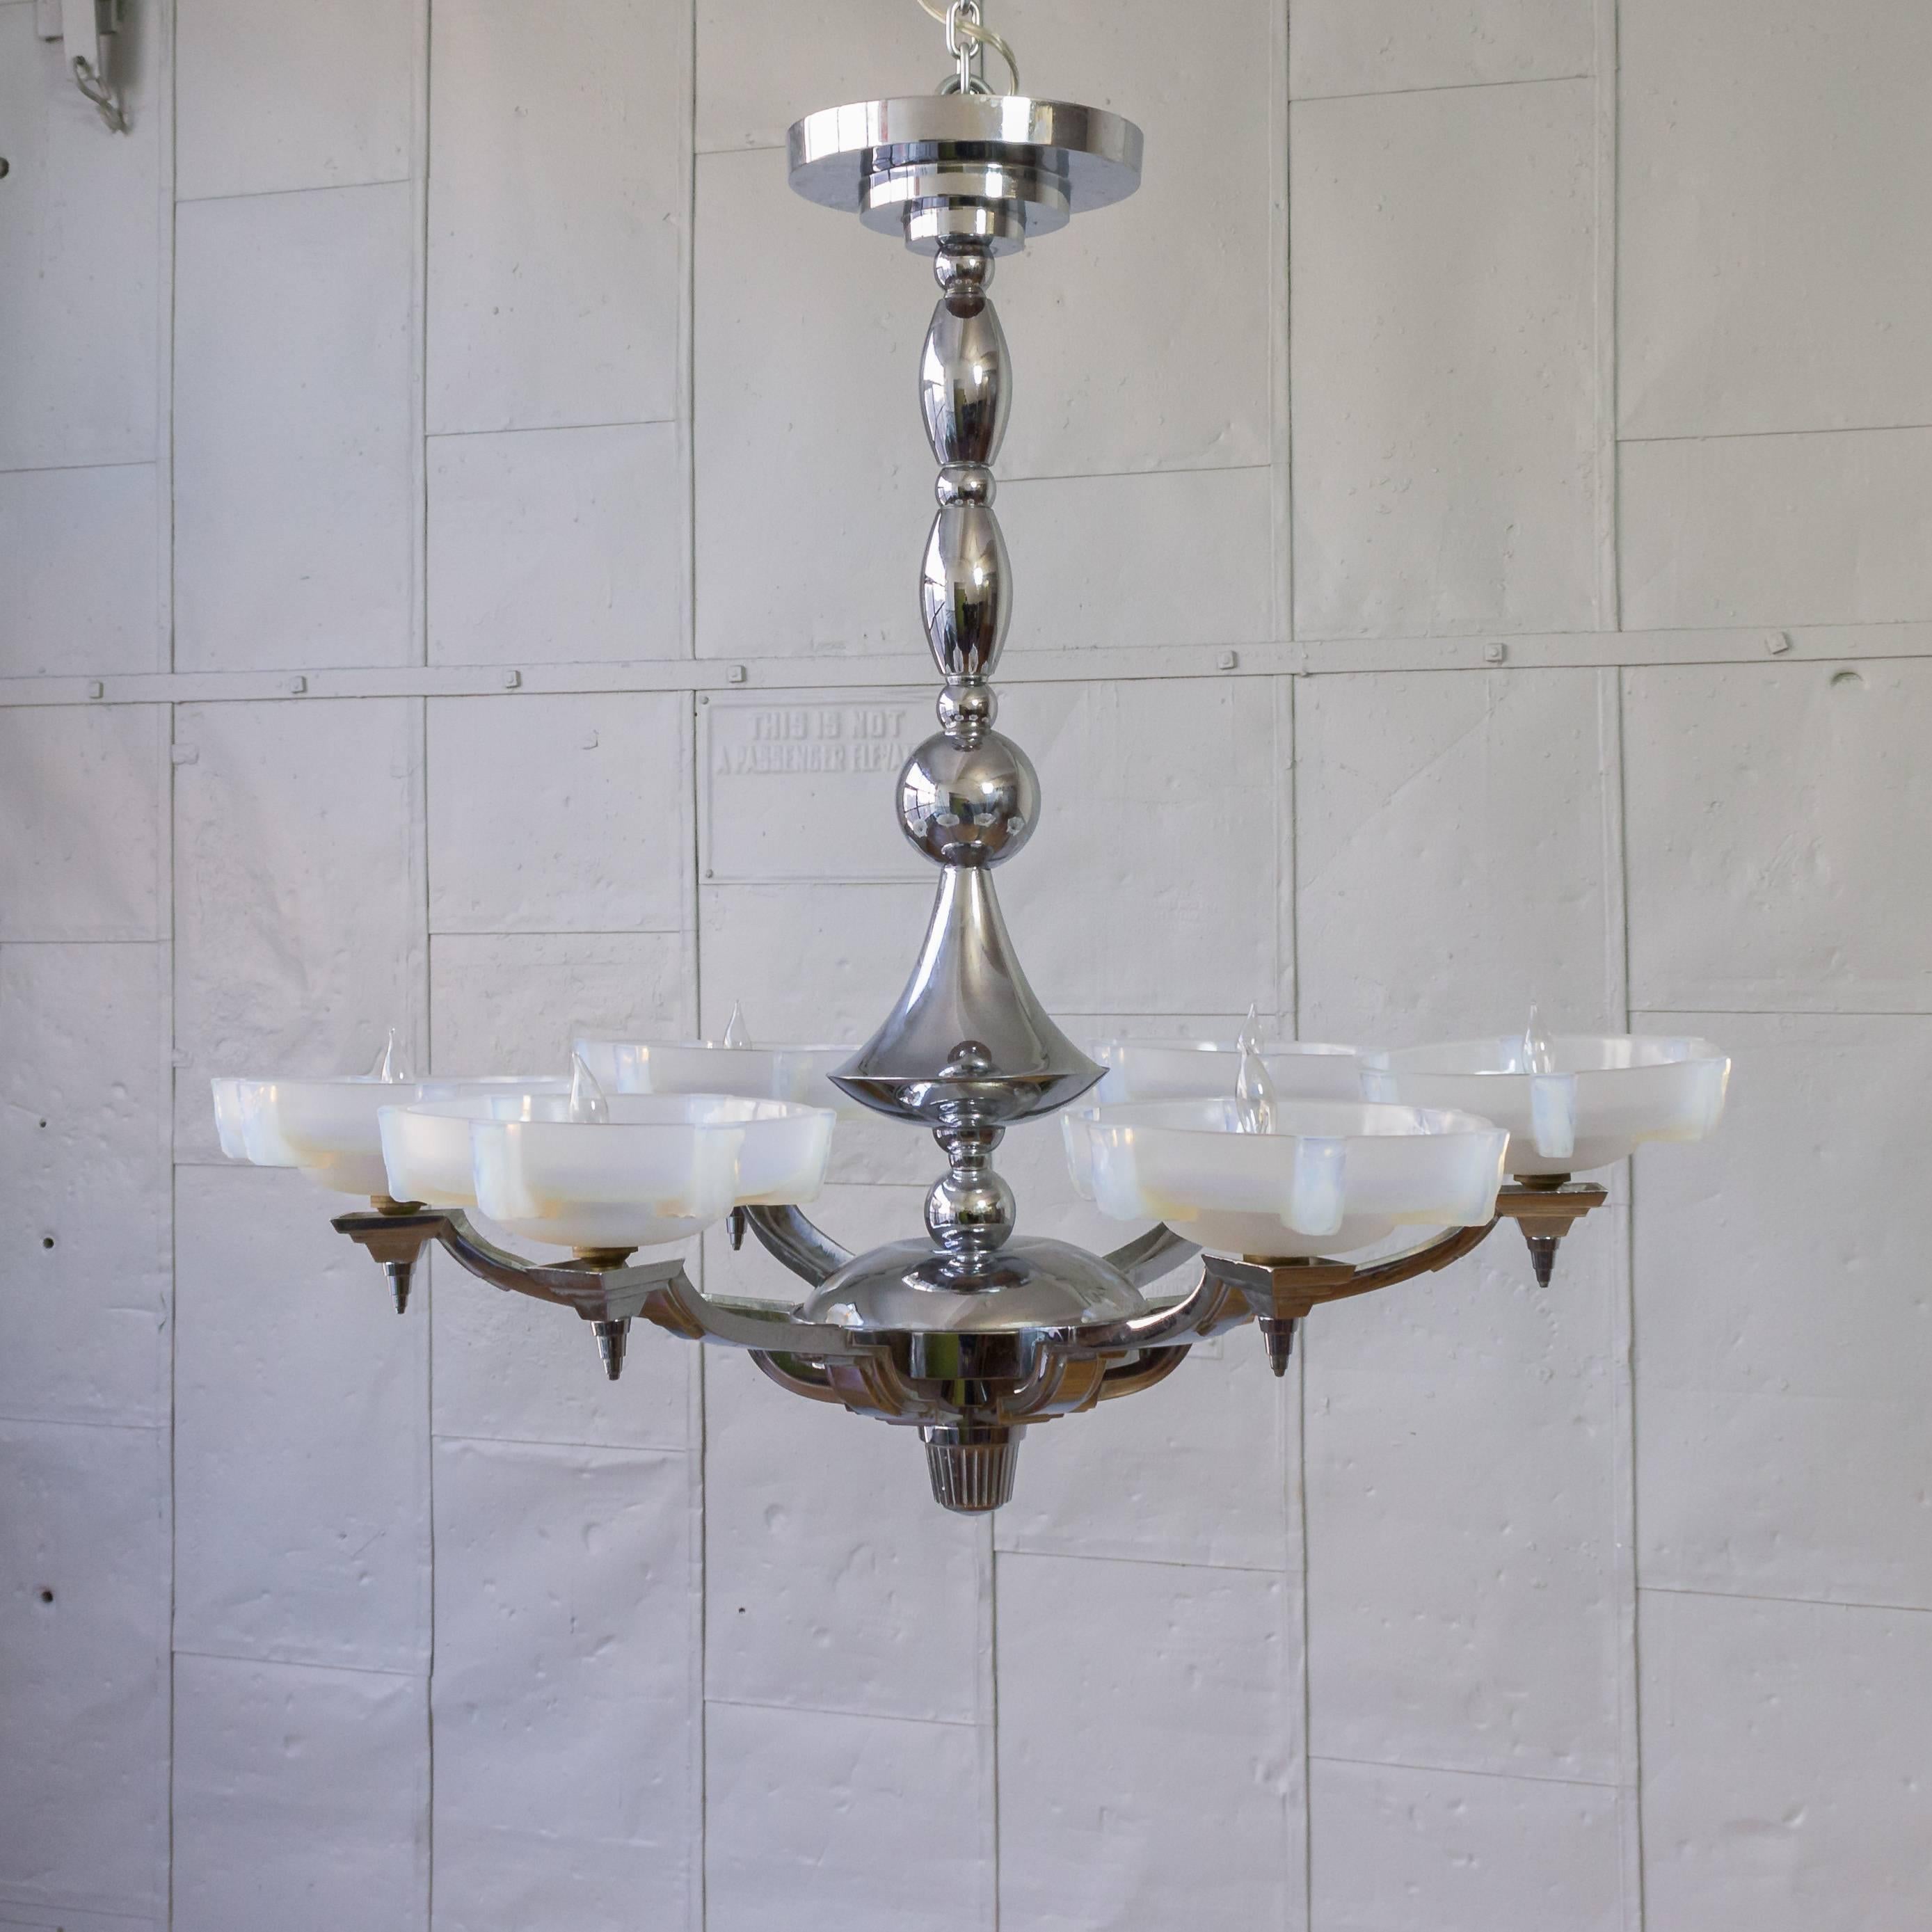 Six arm Art Deco chandelier by Atelier Petitot with nickel plate finish and opaline globes. 